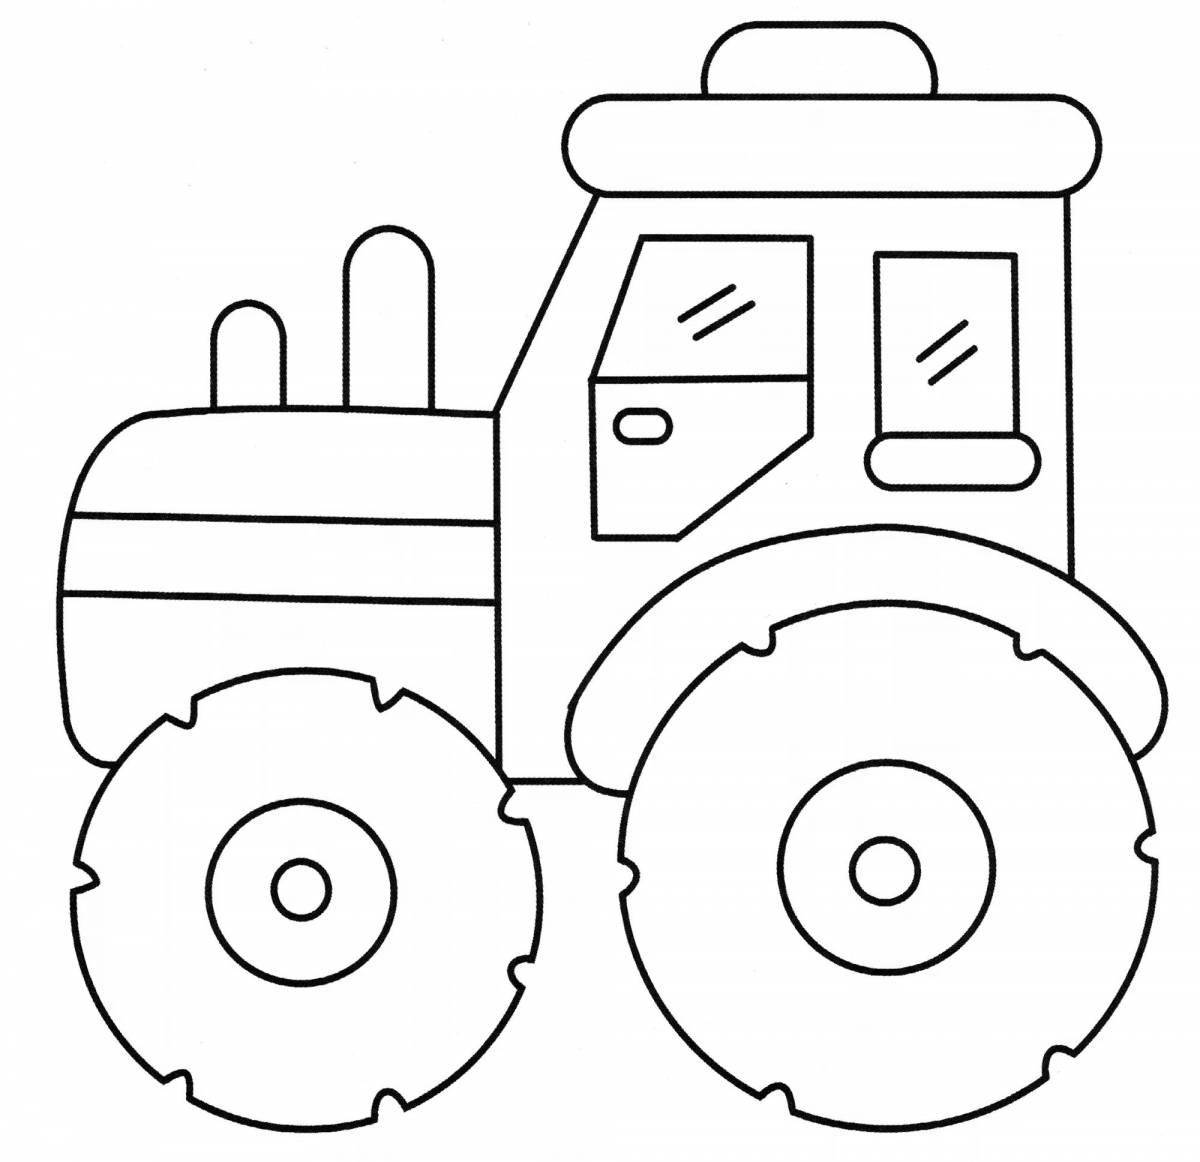 Adorable tractor coloring book for kids 3-4 years old